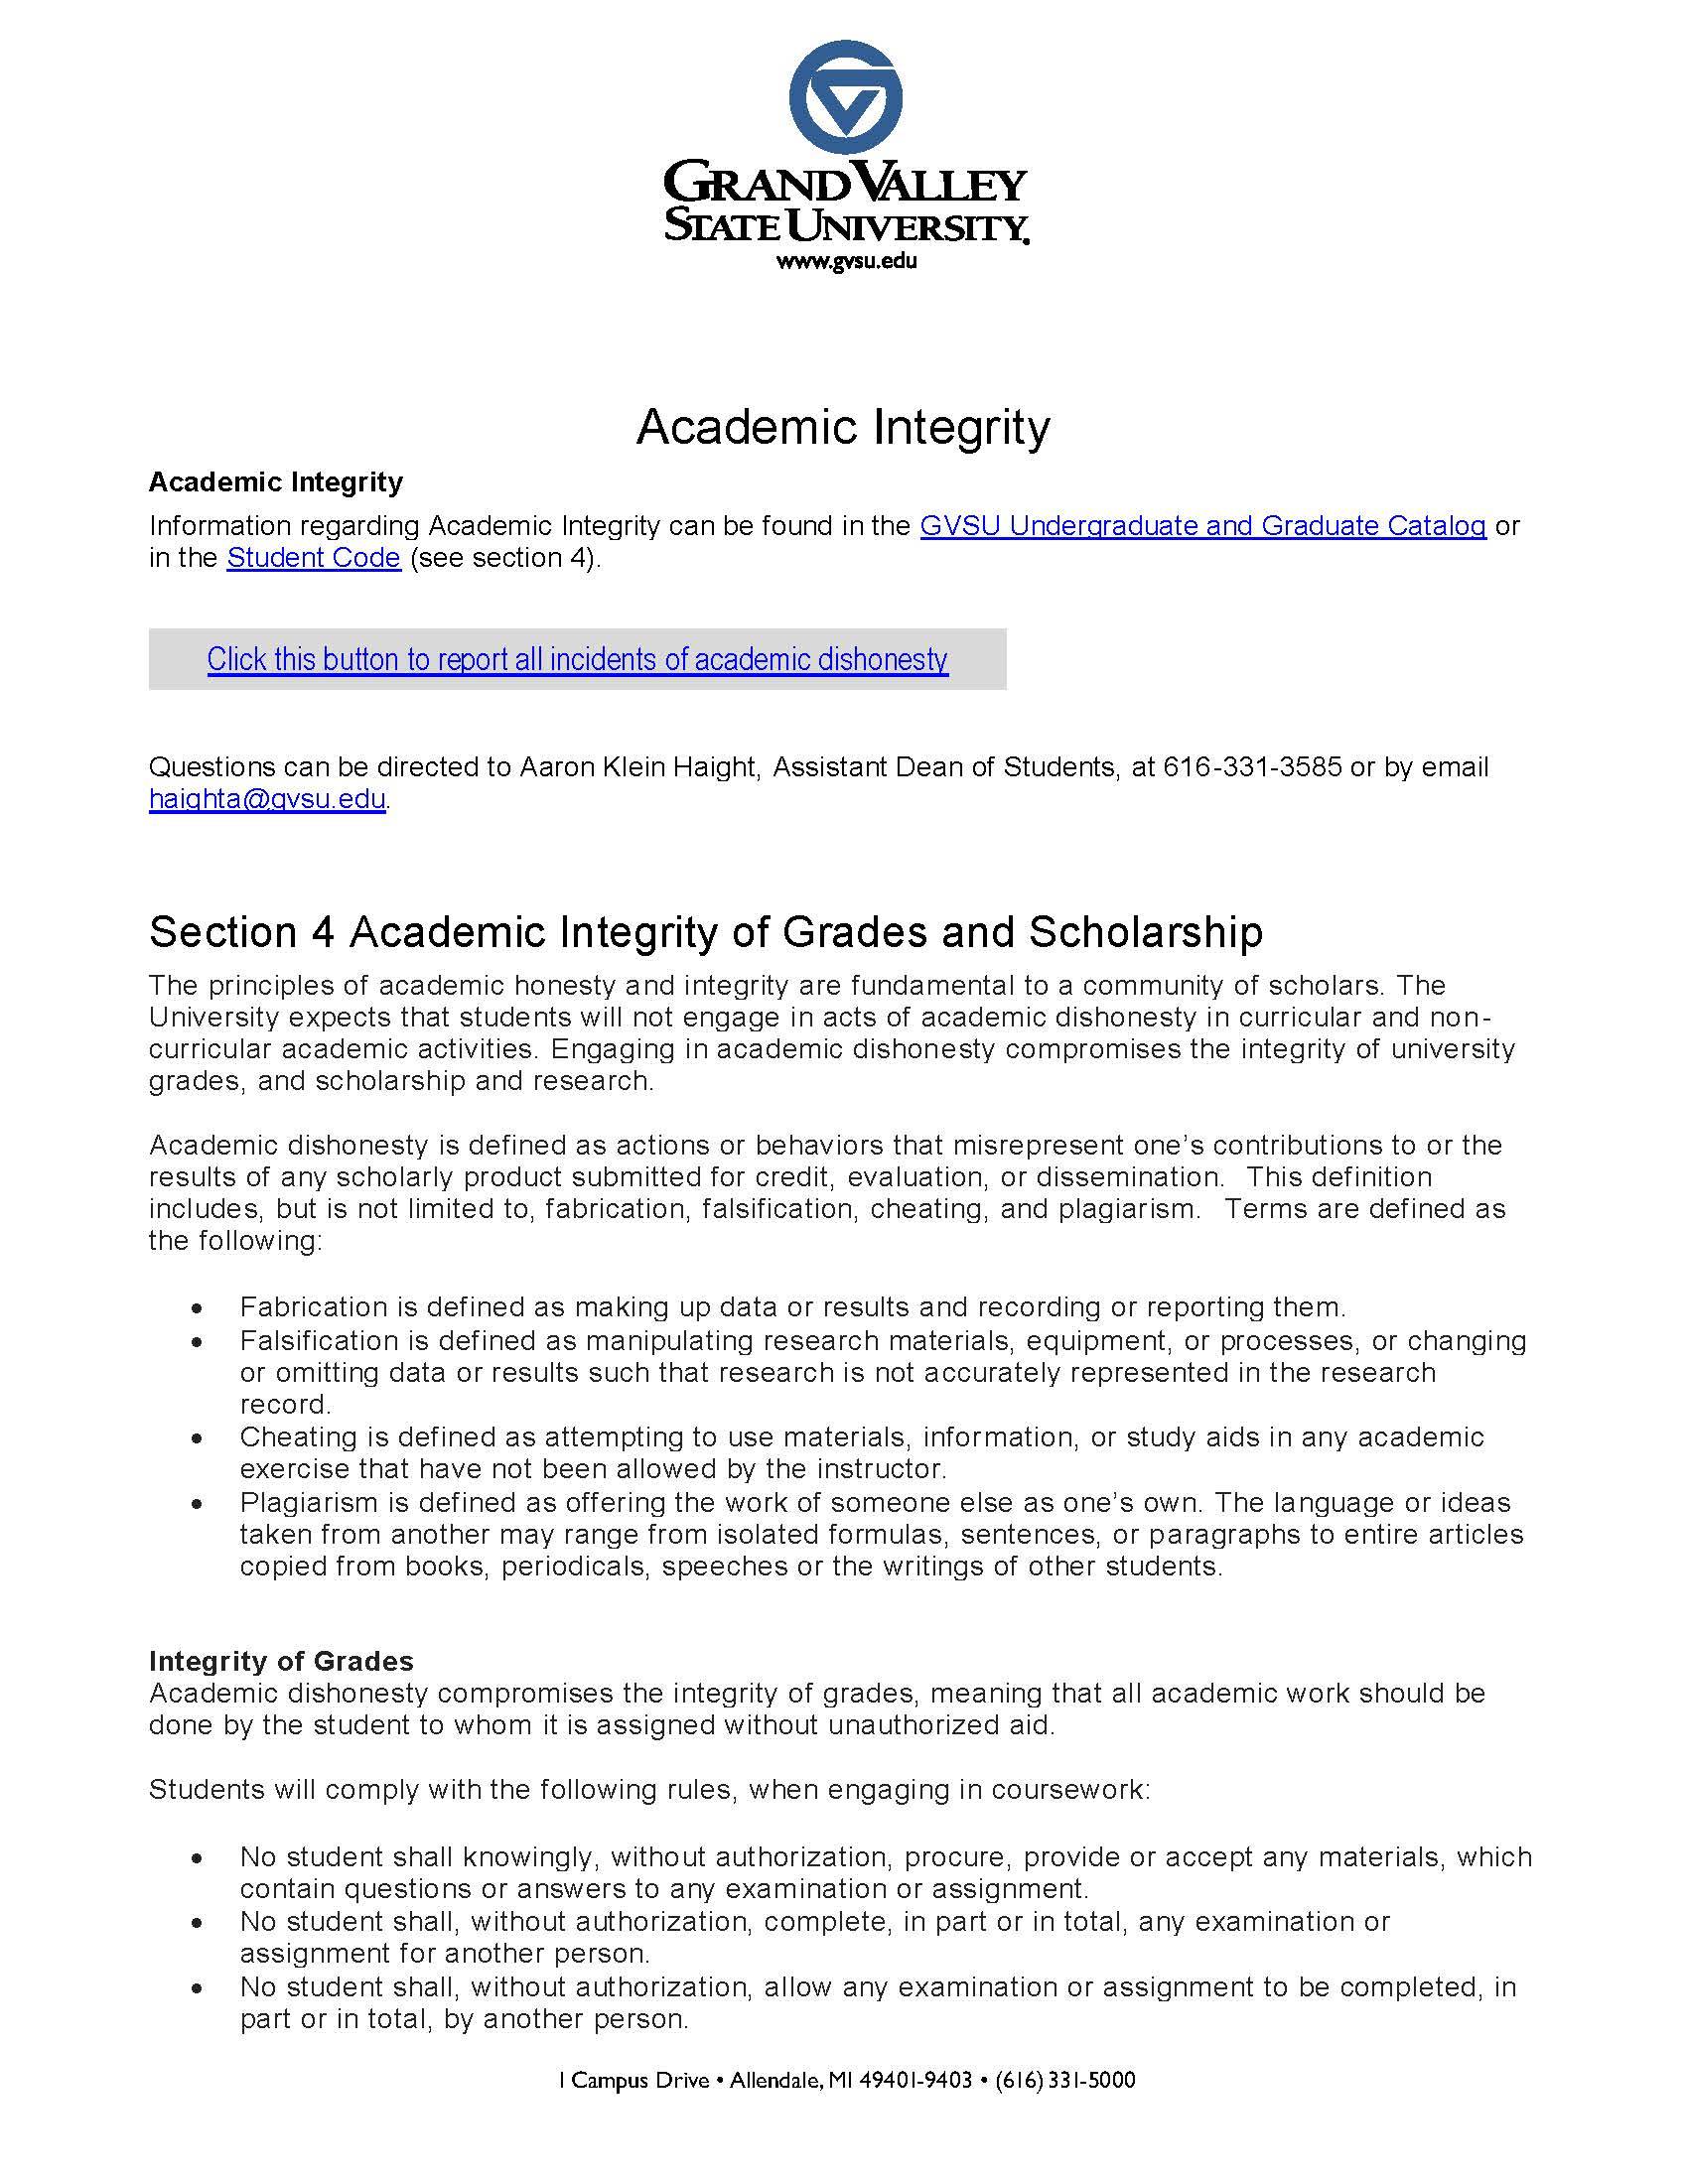 PDF version of Academic Integrity handout for download